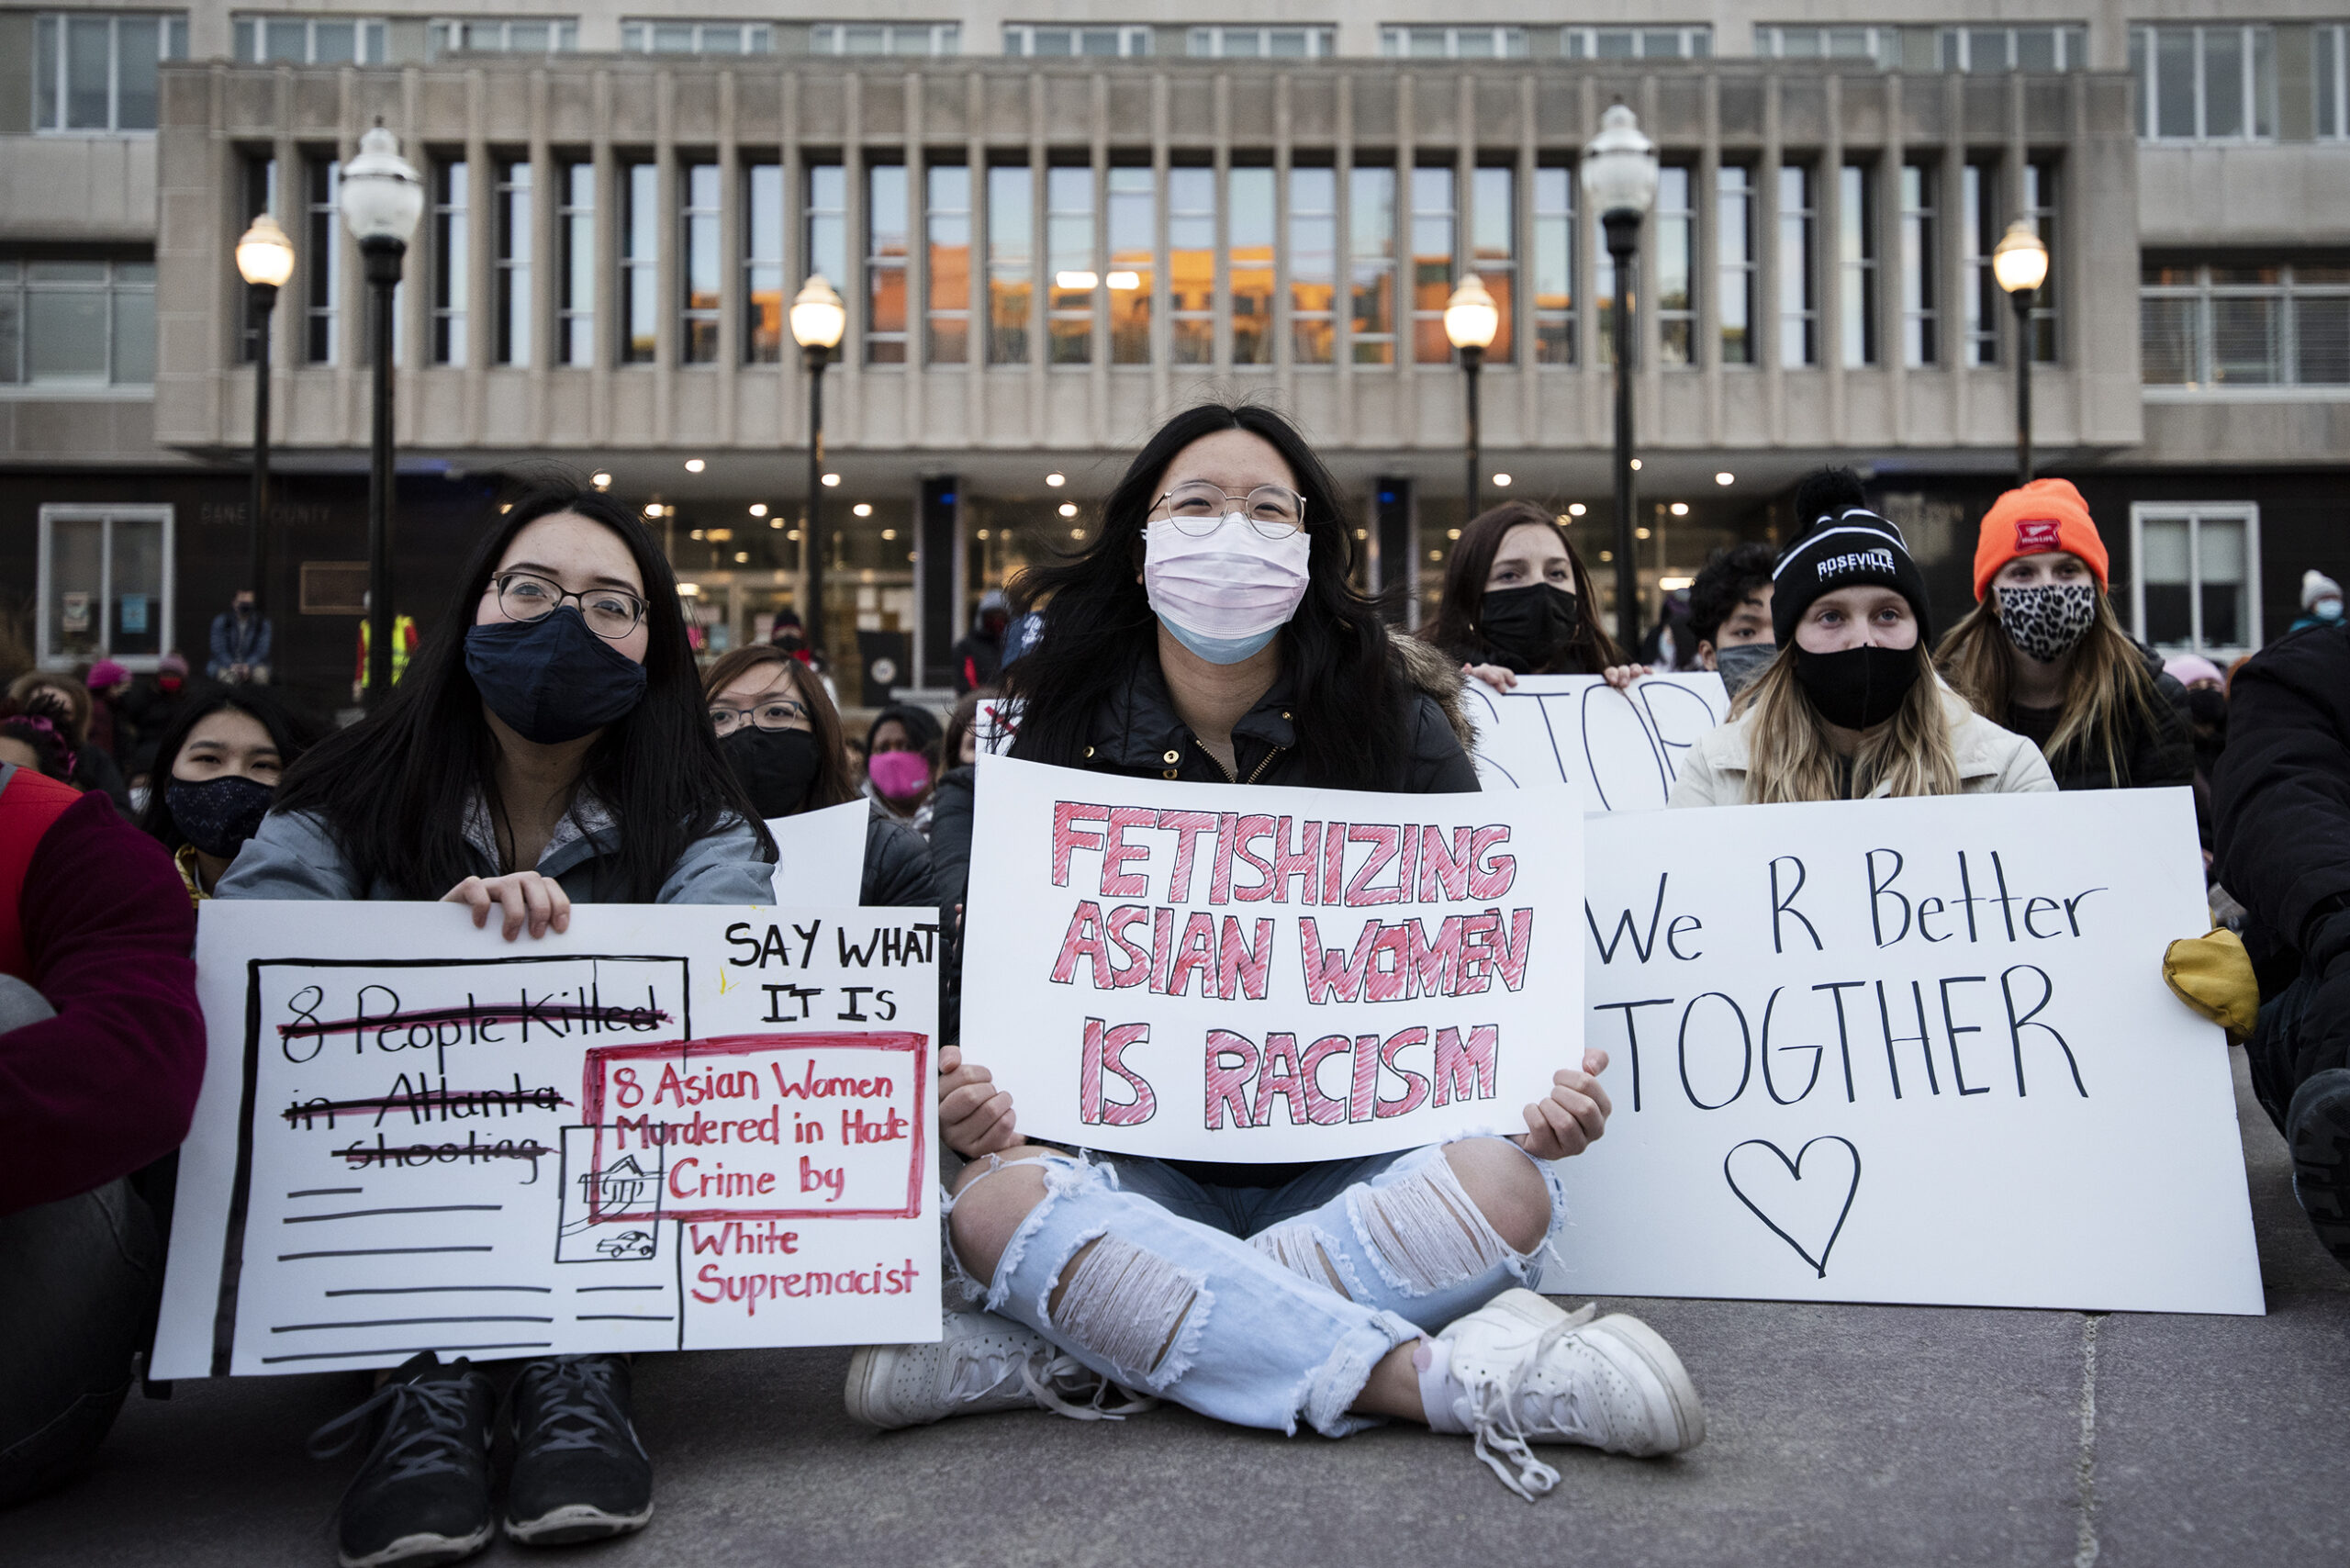 Three women sit prominently at the front of a crowd wearing face masks and displaying signs in support of Asian women.